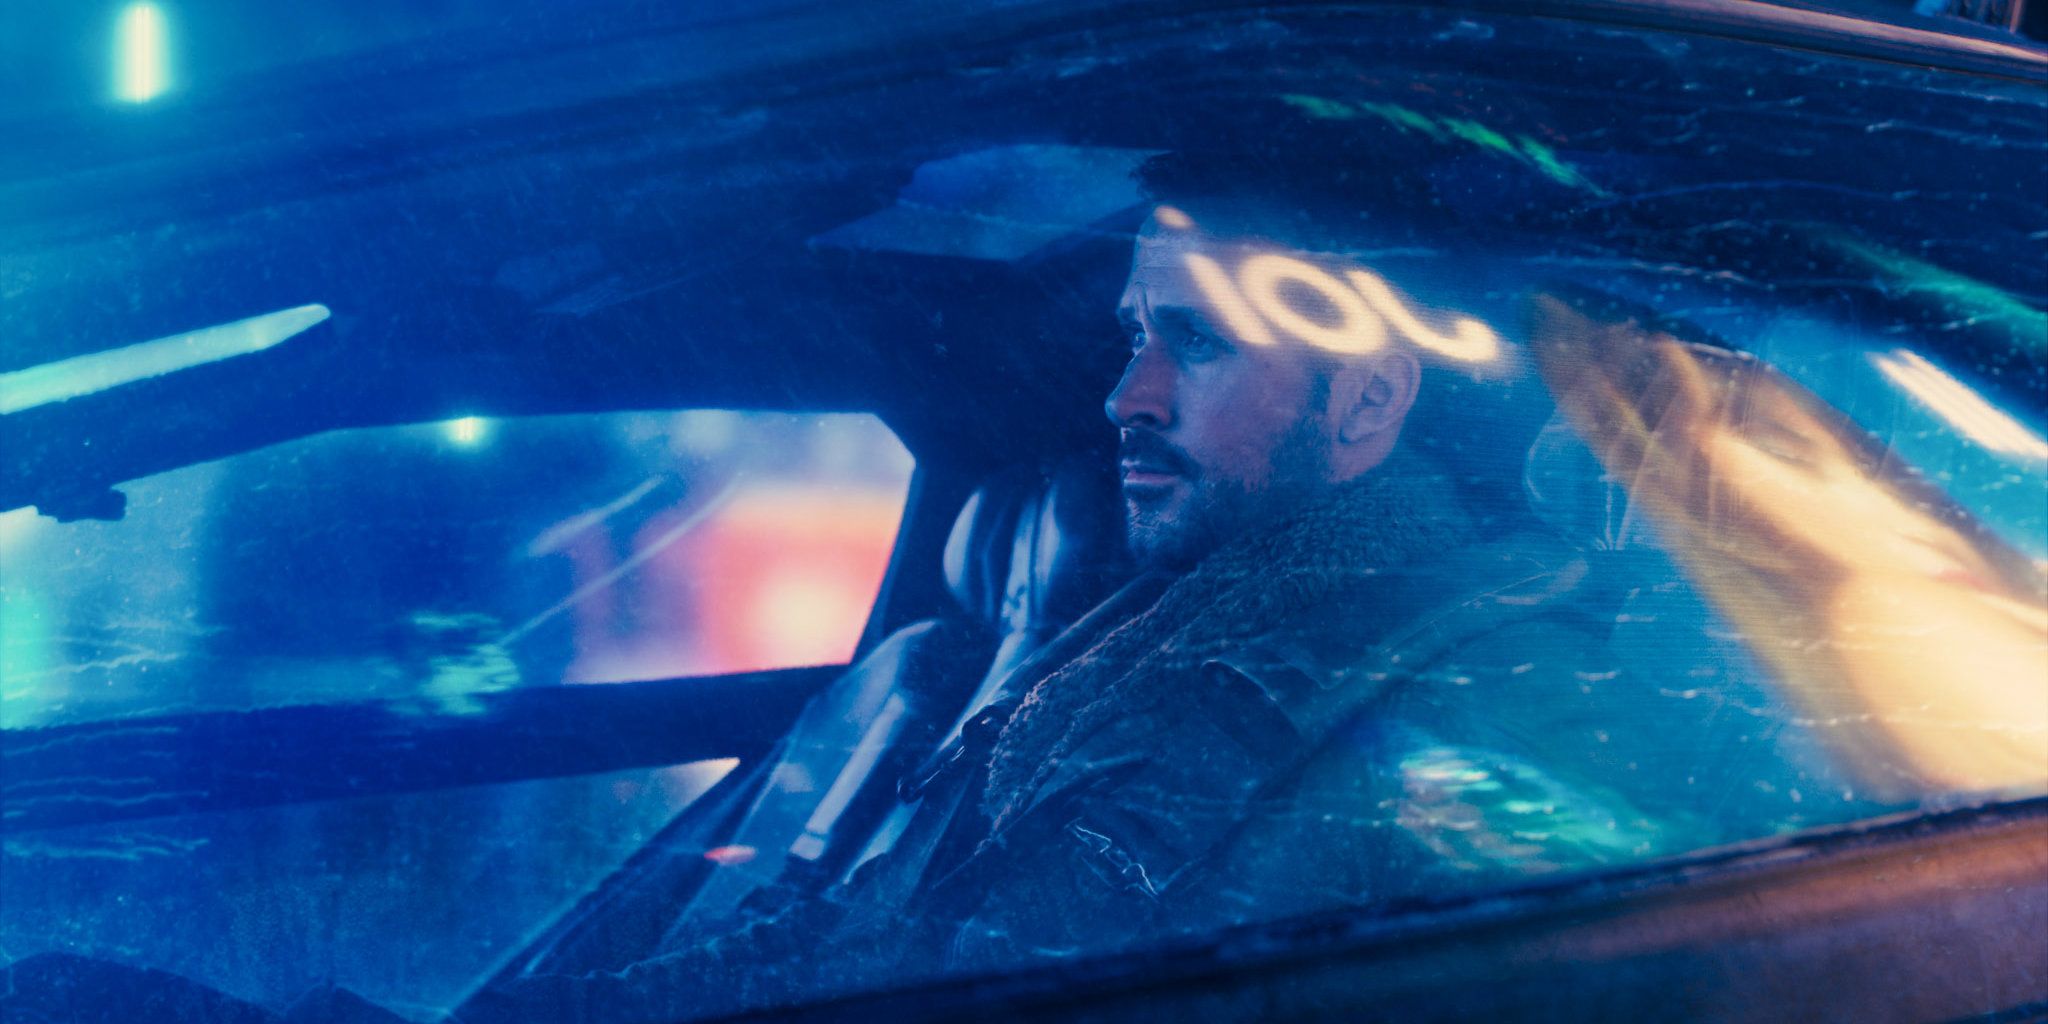 Blade Runner Why Both The Original Movie & 2049 Bombed At The Box Office